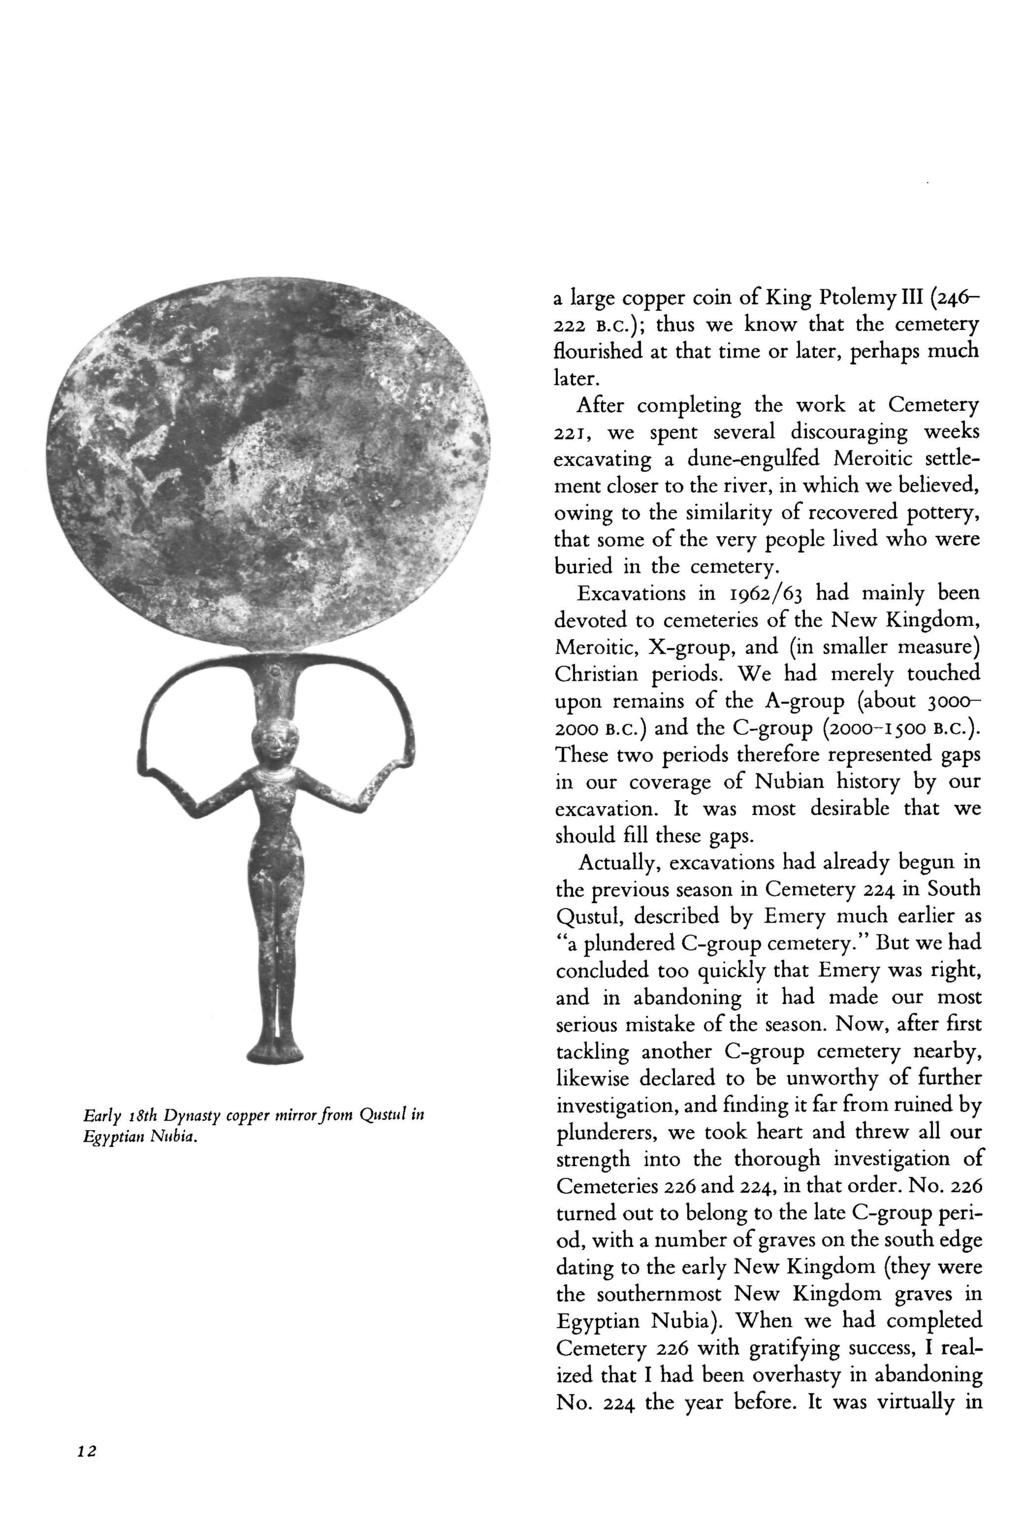 Early isth Dynasty copper mirror from Qustul in Egyptian Nubia. a large copper coin of King Ptolemy III (246-222 B.C.